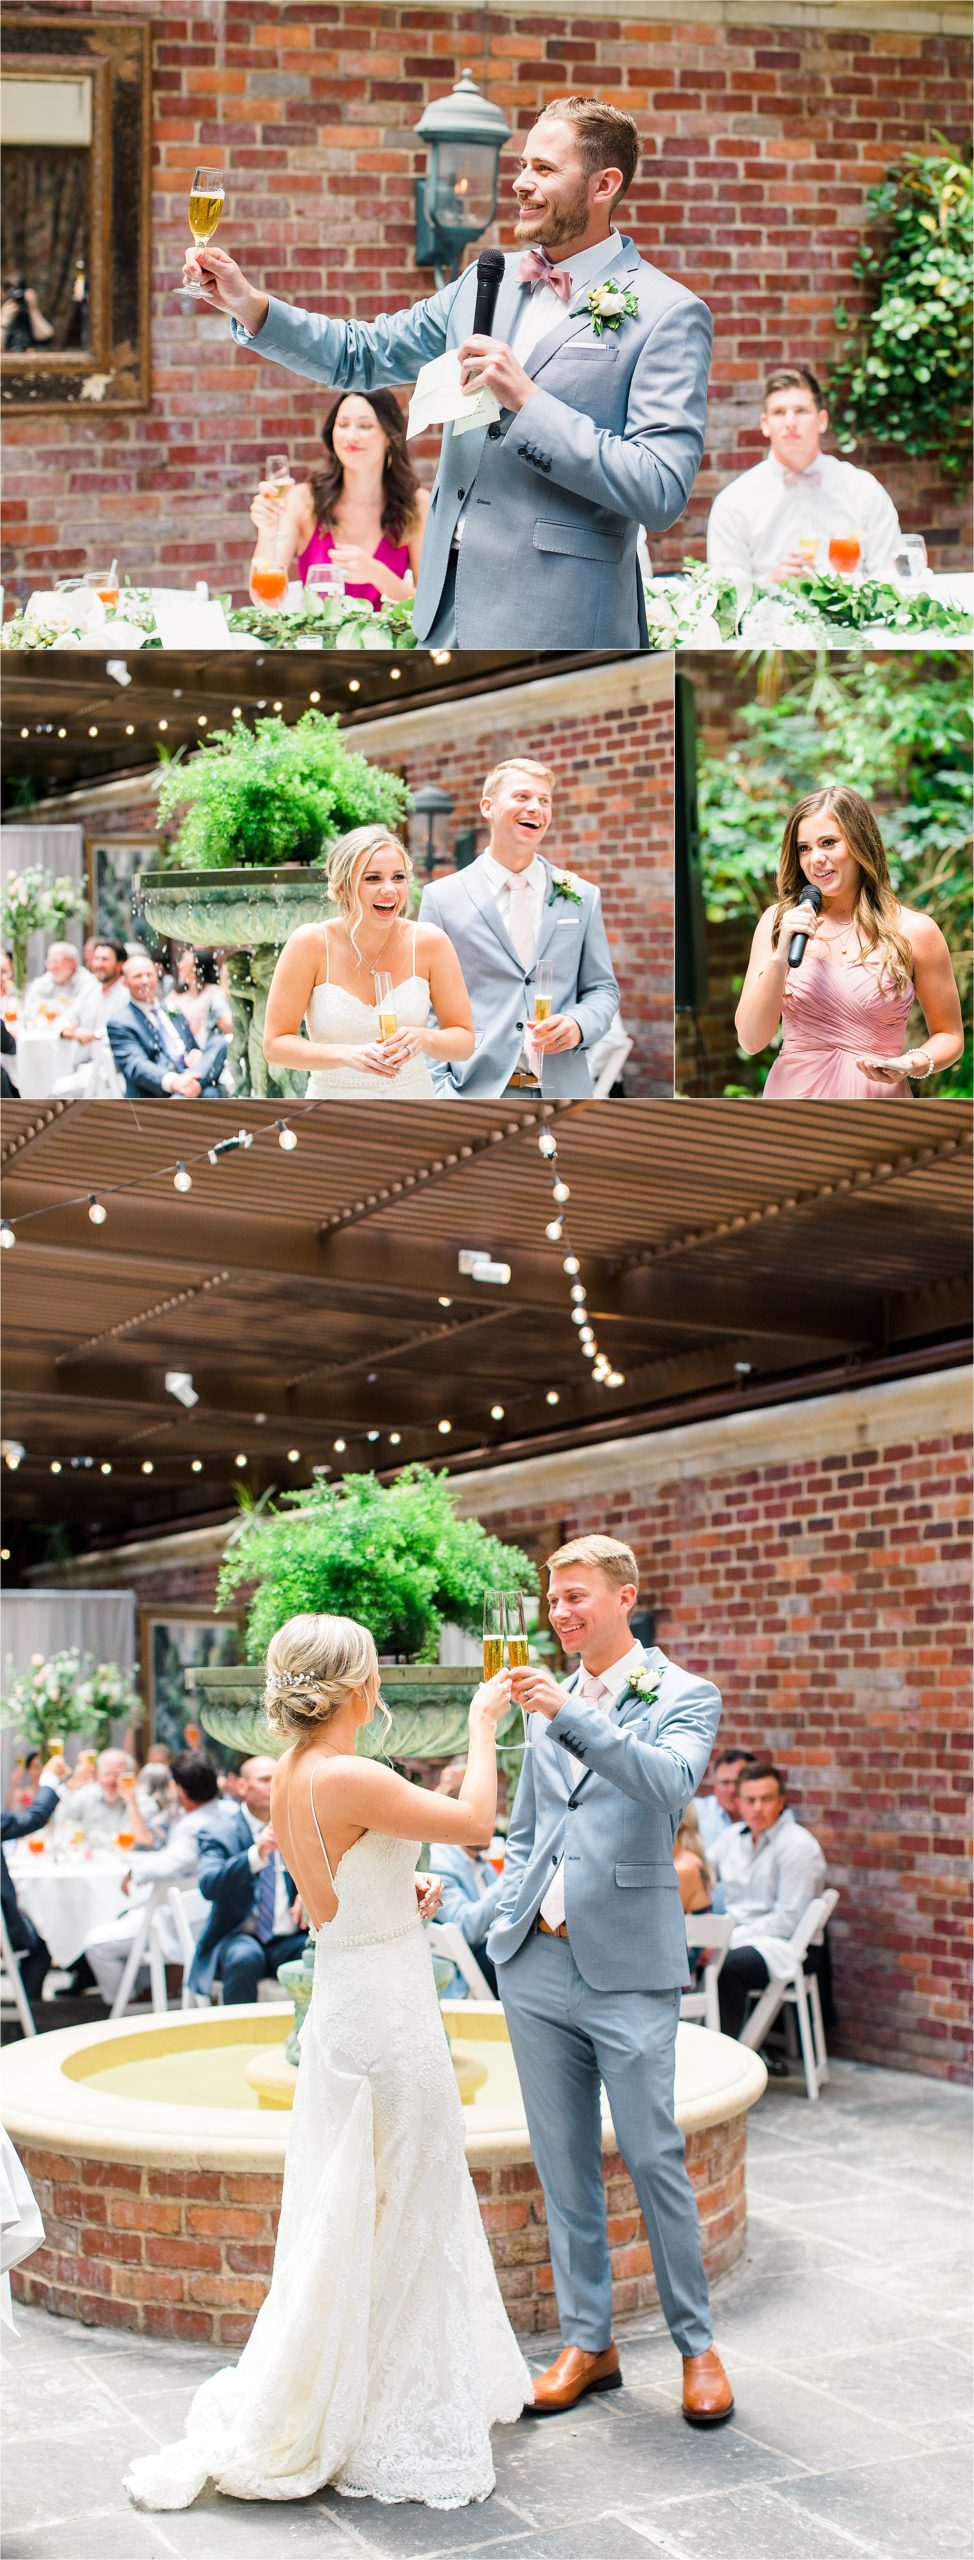 A bridal party share cheers during at a garden reception at III Forks in Dallas, Texas 